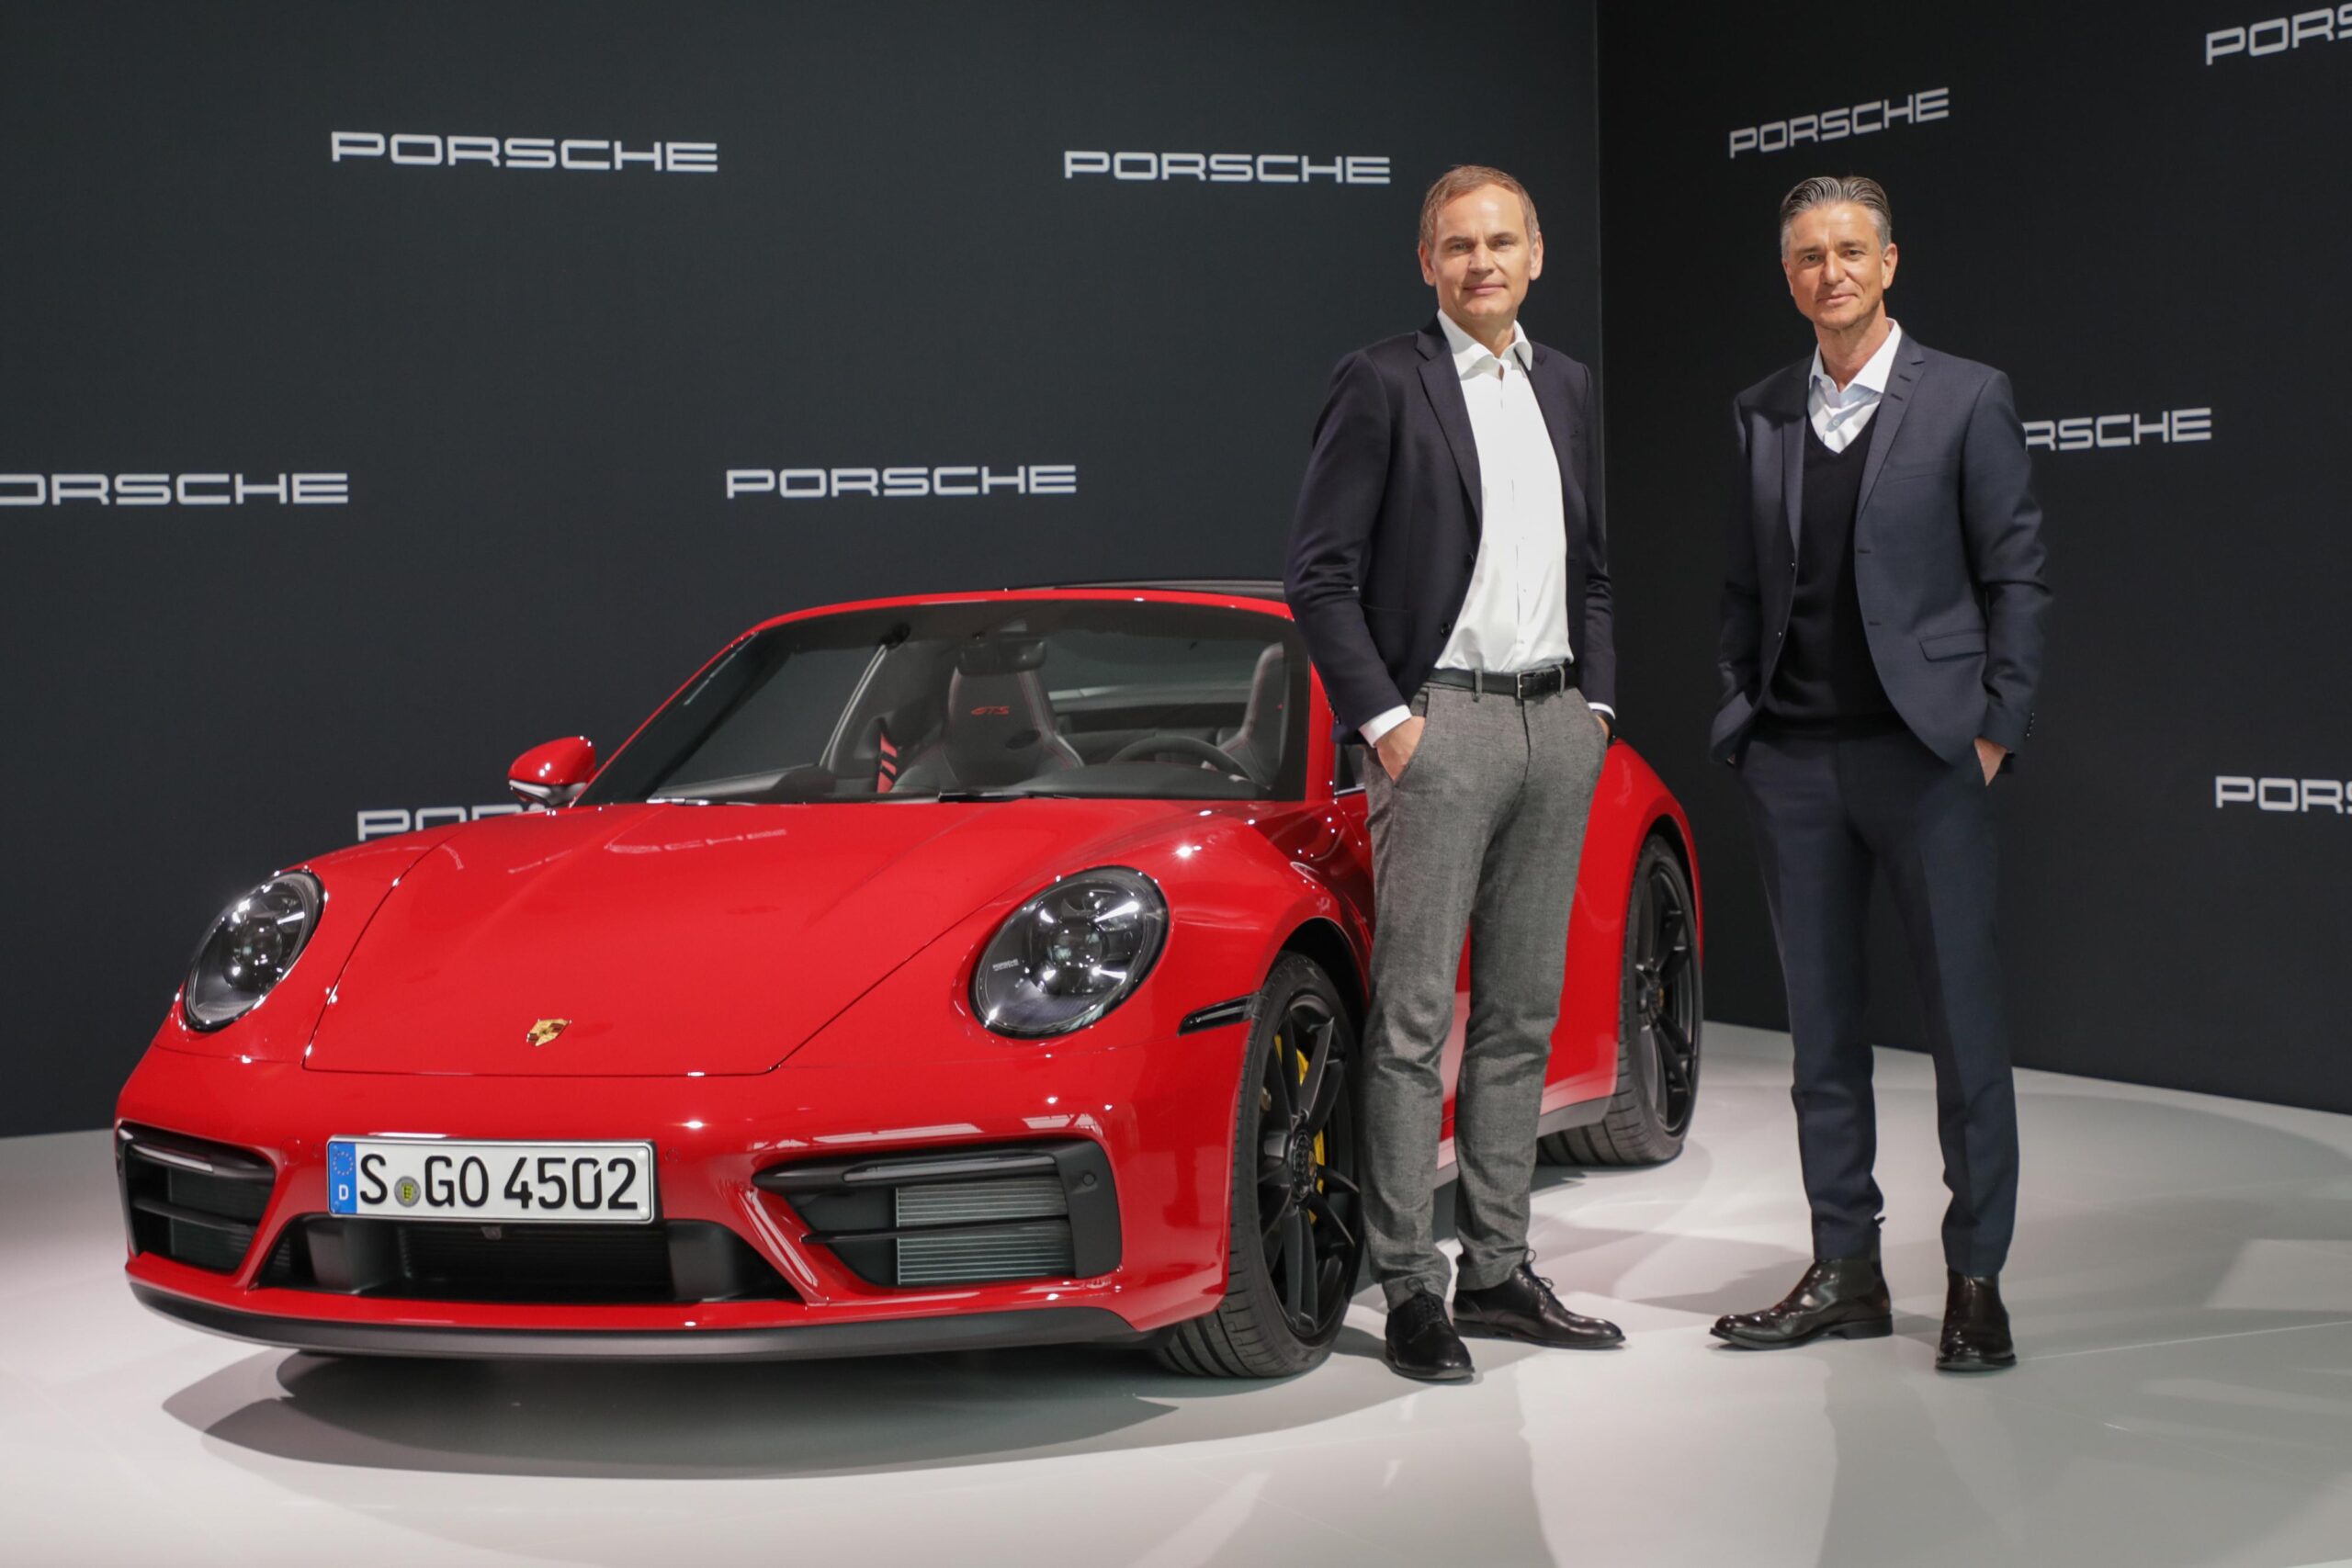 Porsche AG - Oliver Blume and Lutz Meschke announced the figures for the 2021 financial year.